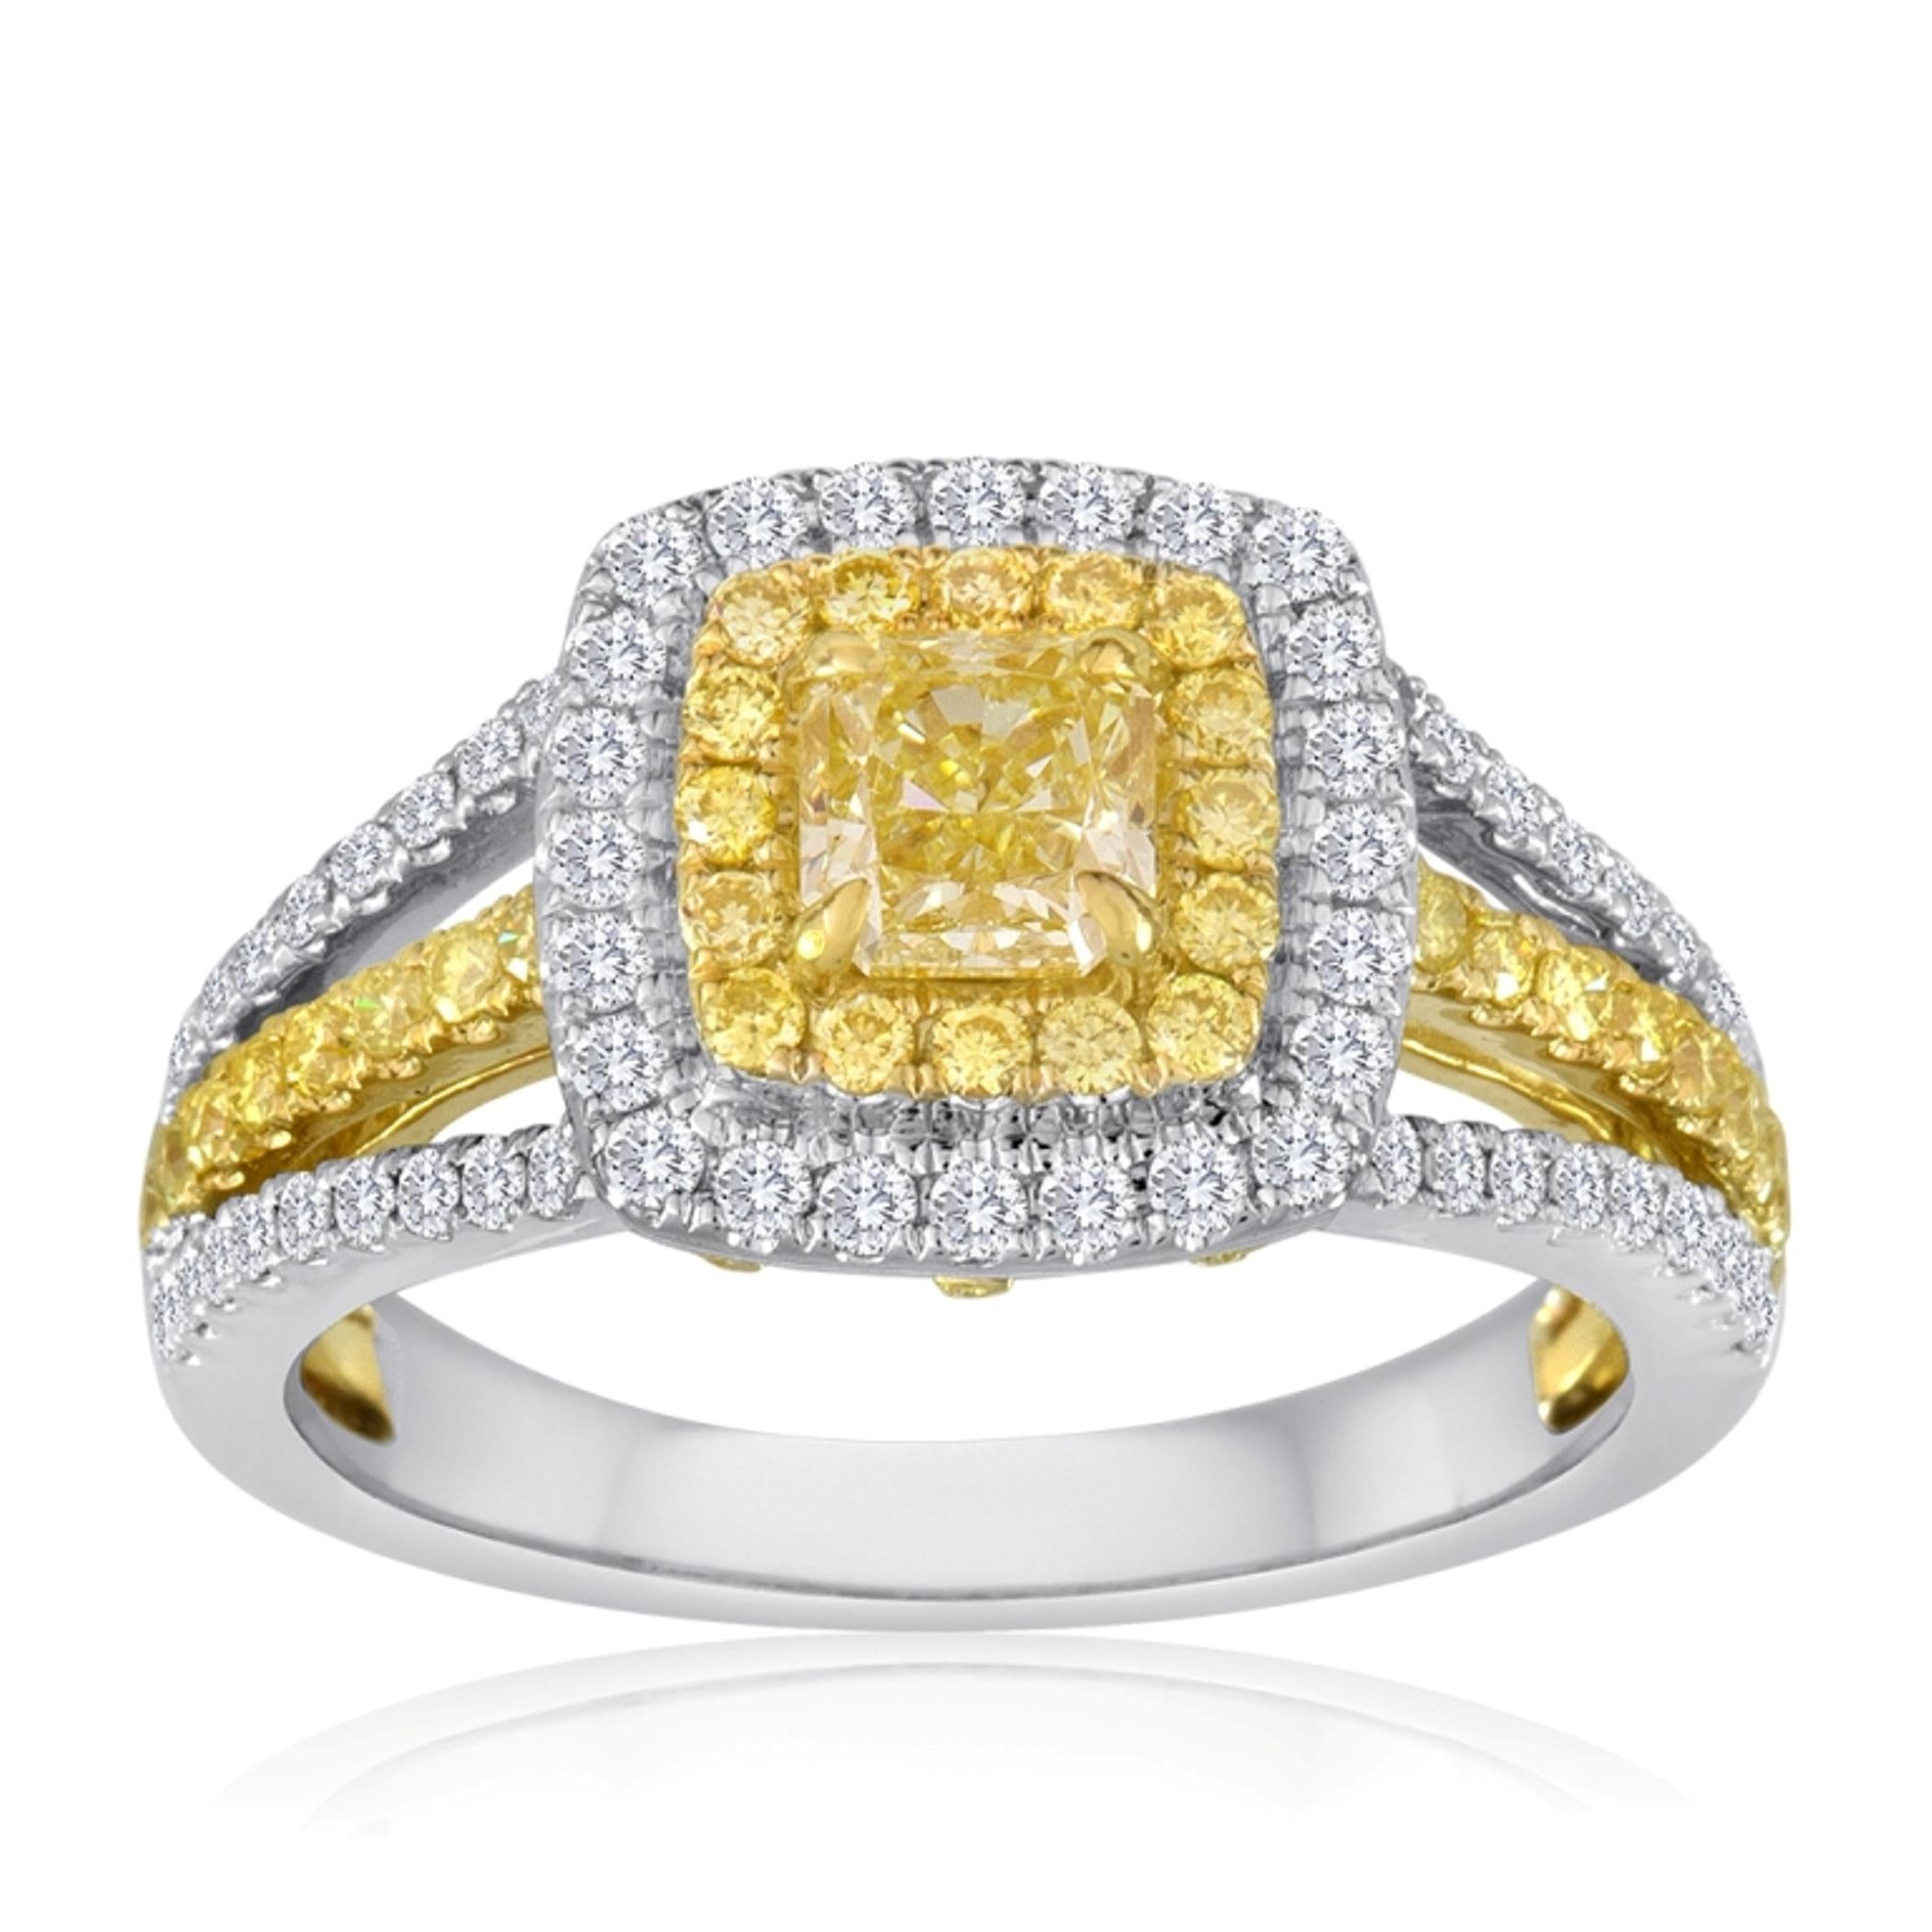  Fancy Yellow Diamond Radiant Cut 0.70 Carat Encircled in Double Halo of Fancy Yellow Round Diamonds 0.40 Carat and White Round Diamonds 0.43 Carat in a Stunning Three Row Split Shank 18K White and Yellow Gold Ring.

Style available in different